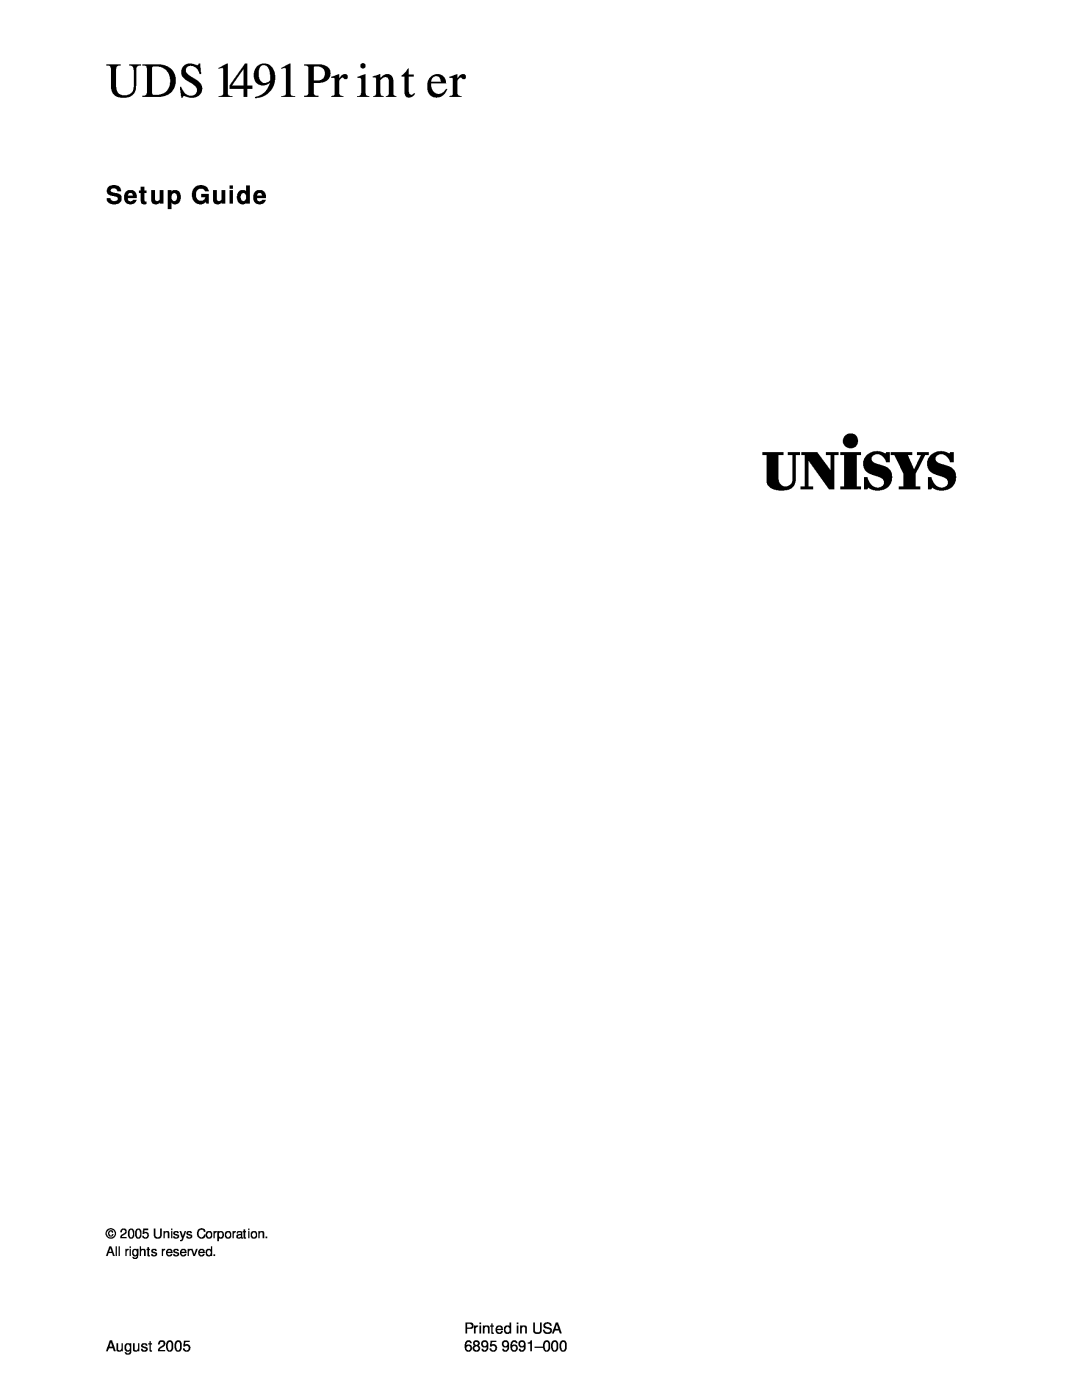 Unisys setup guide Unisys, UDS 1491 Printer, Setup Guide, Printed in USA, August, 6895 